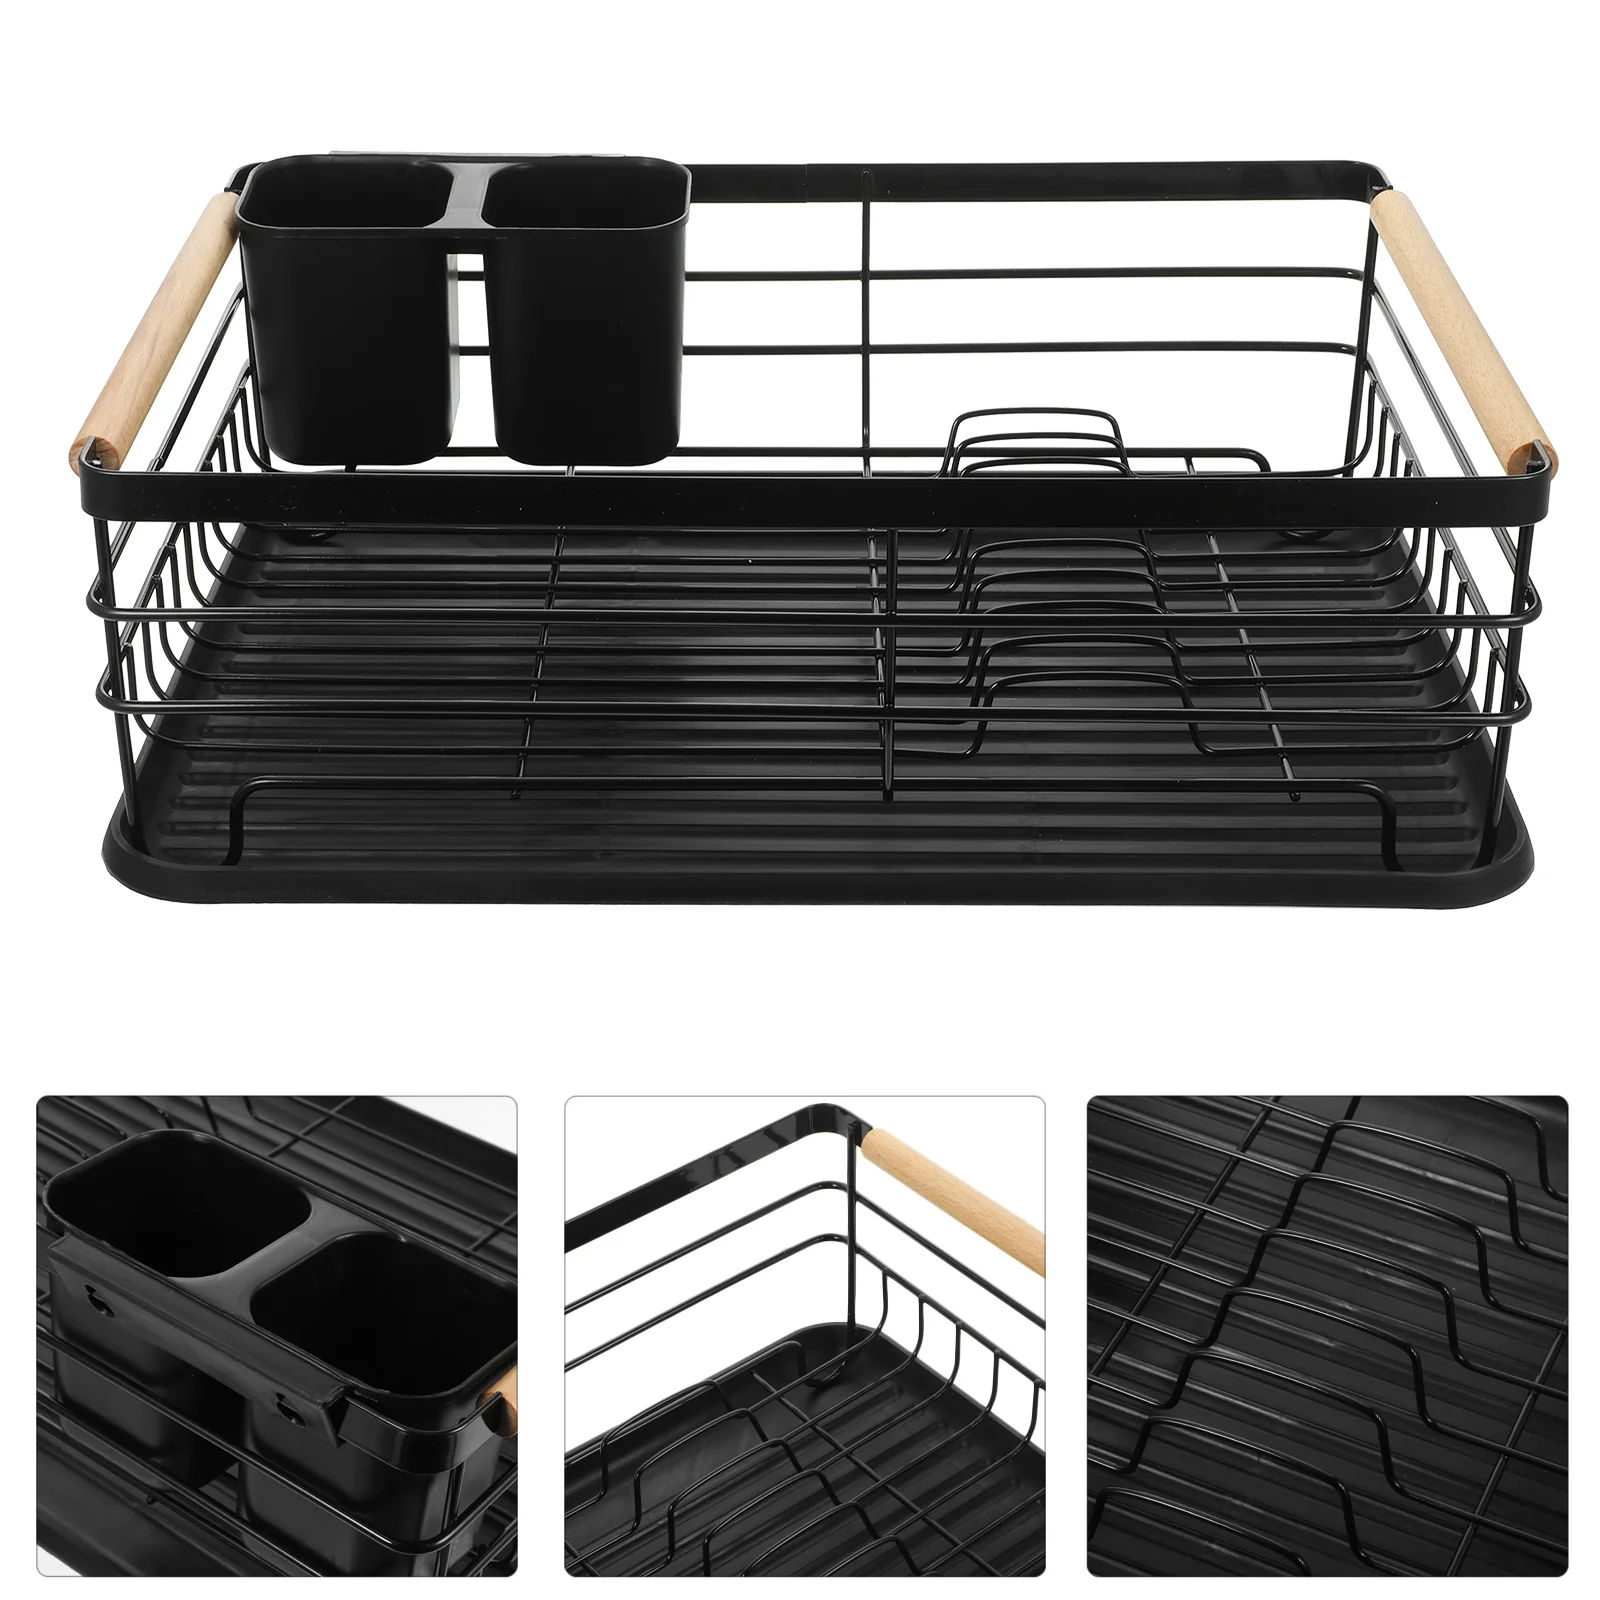 

Dish Drying Rack Dish Racks for Kitchen Counter Dish Drainer with Removable Draining Tray Sink Multifunctional hanging